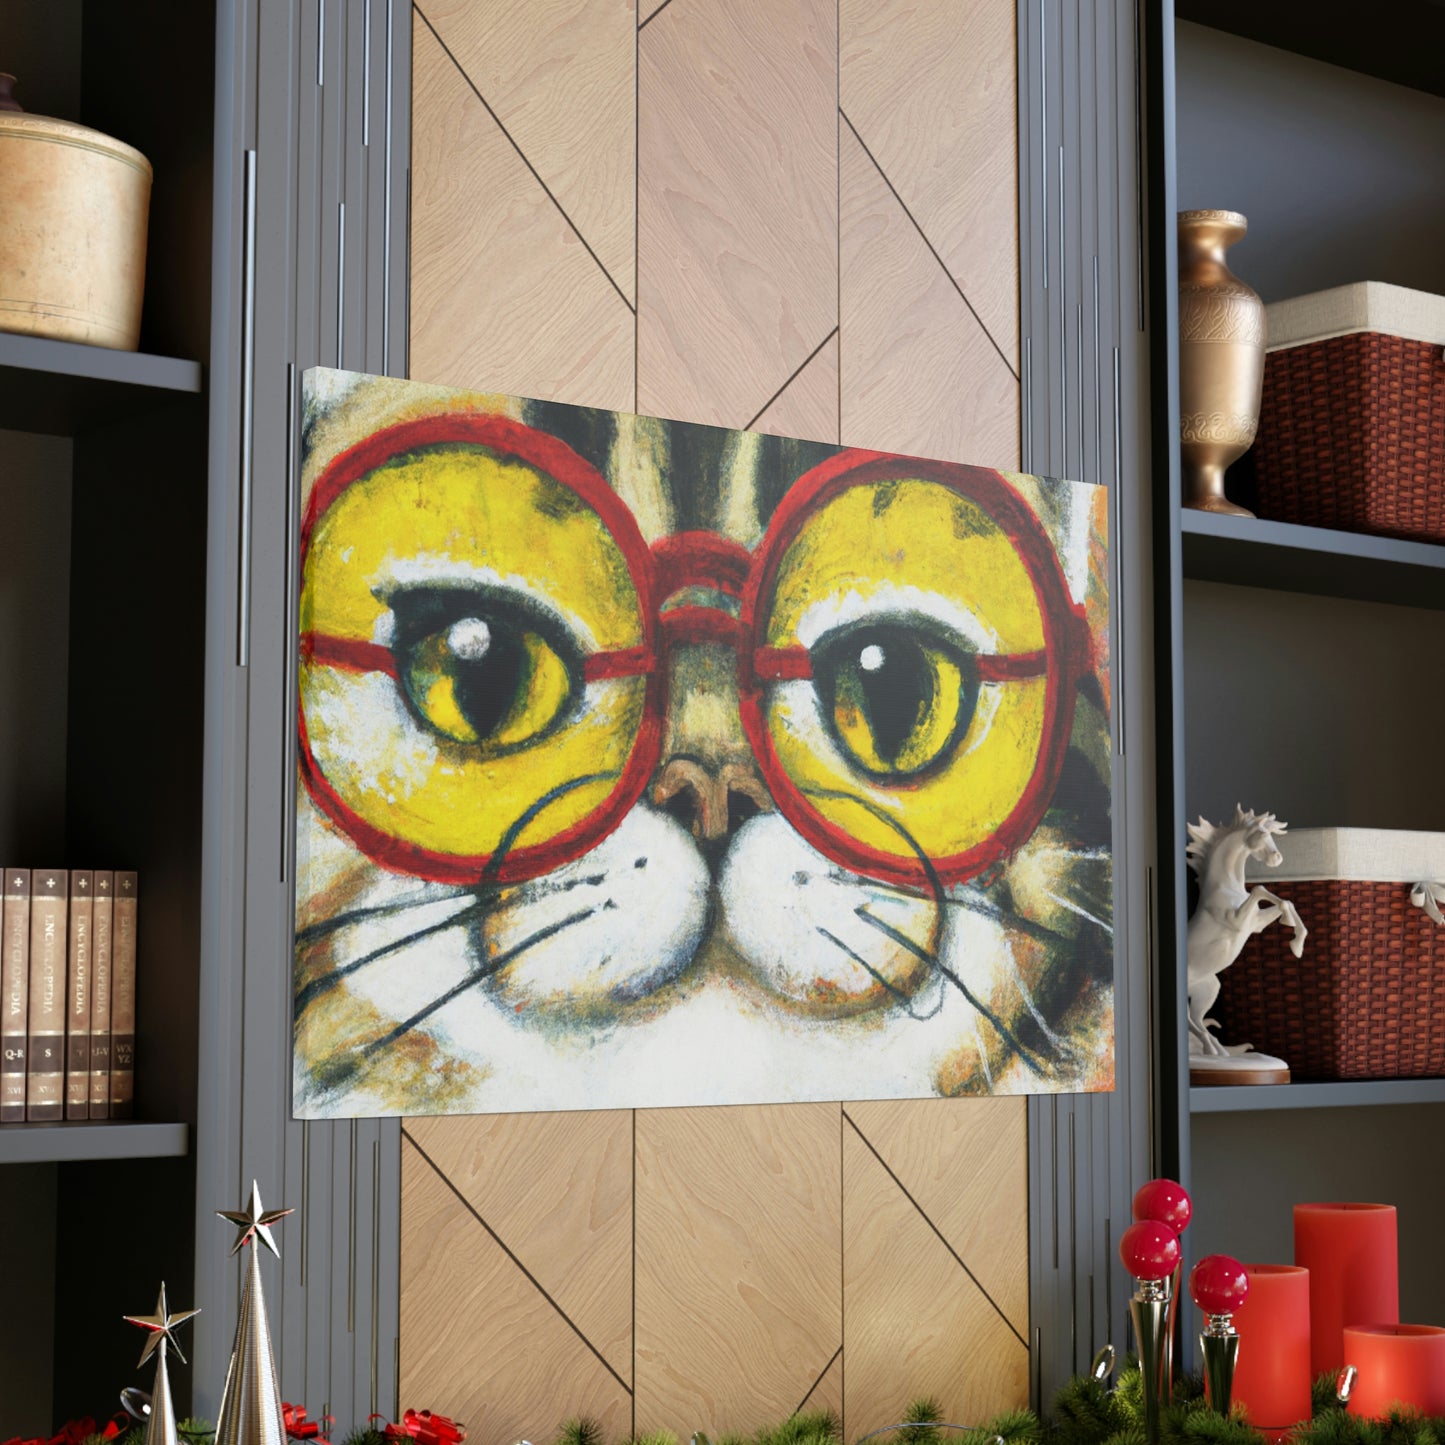 Scoopsy Simons - Cat Lovers Canvas Wall Art